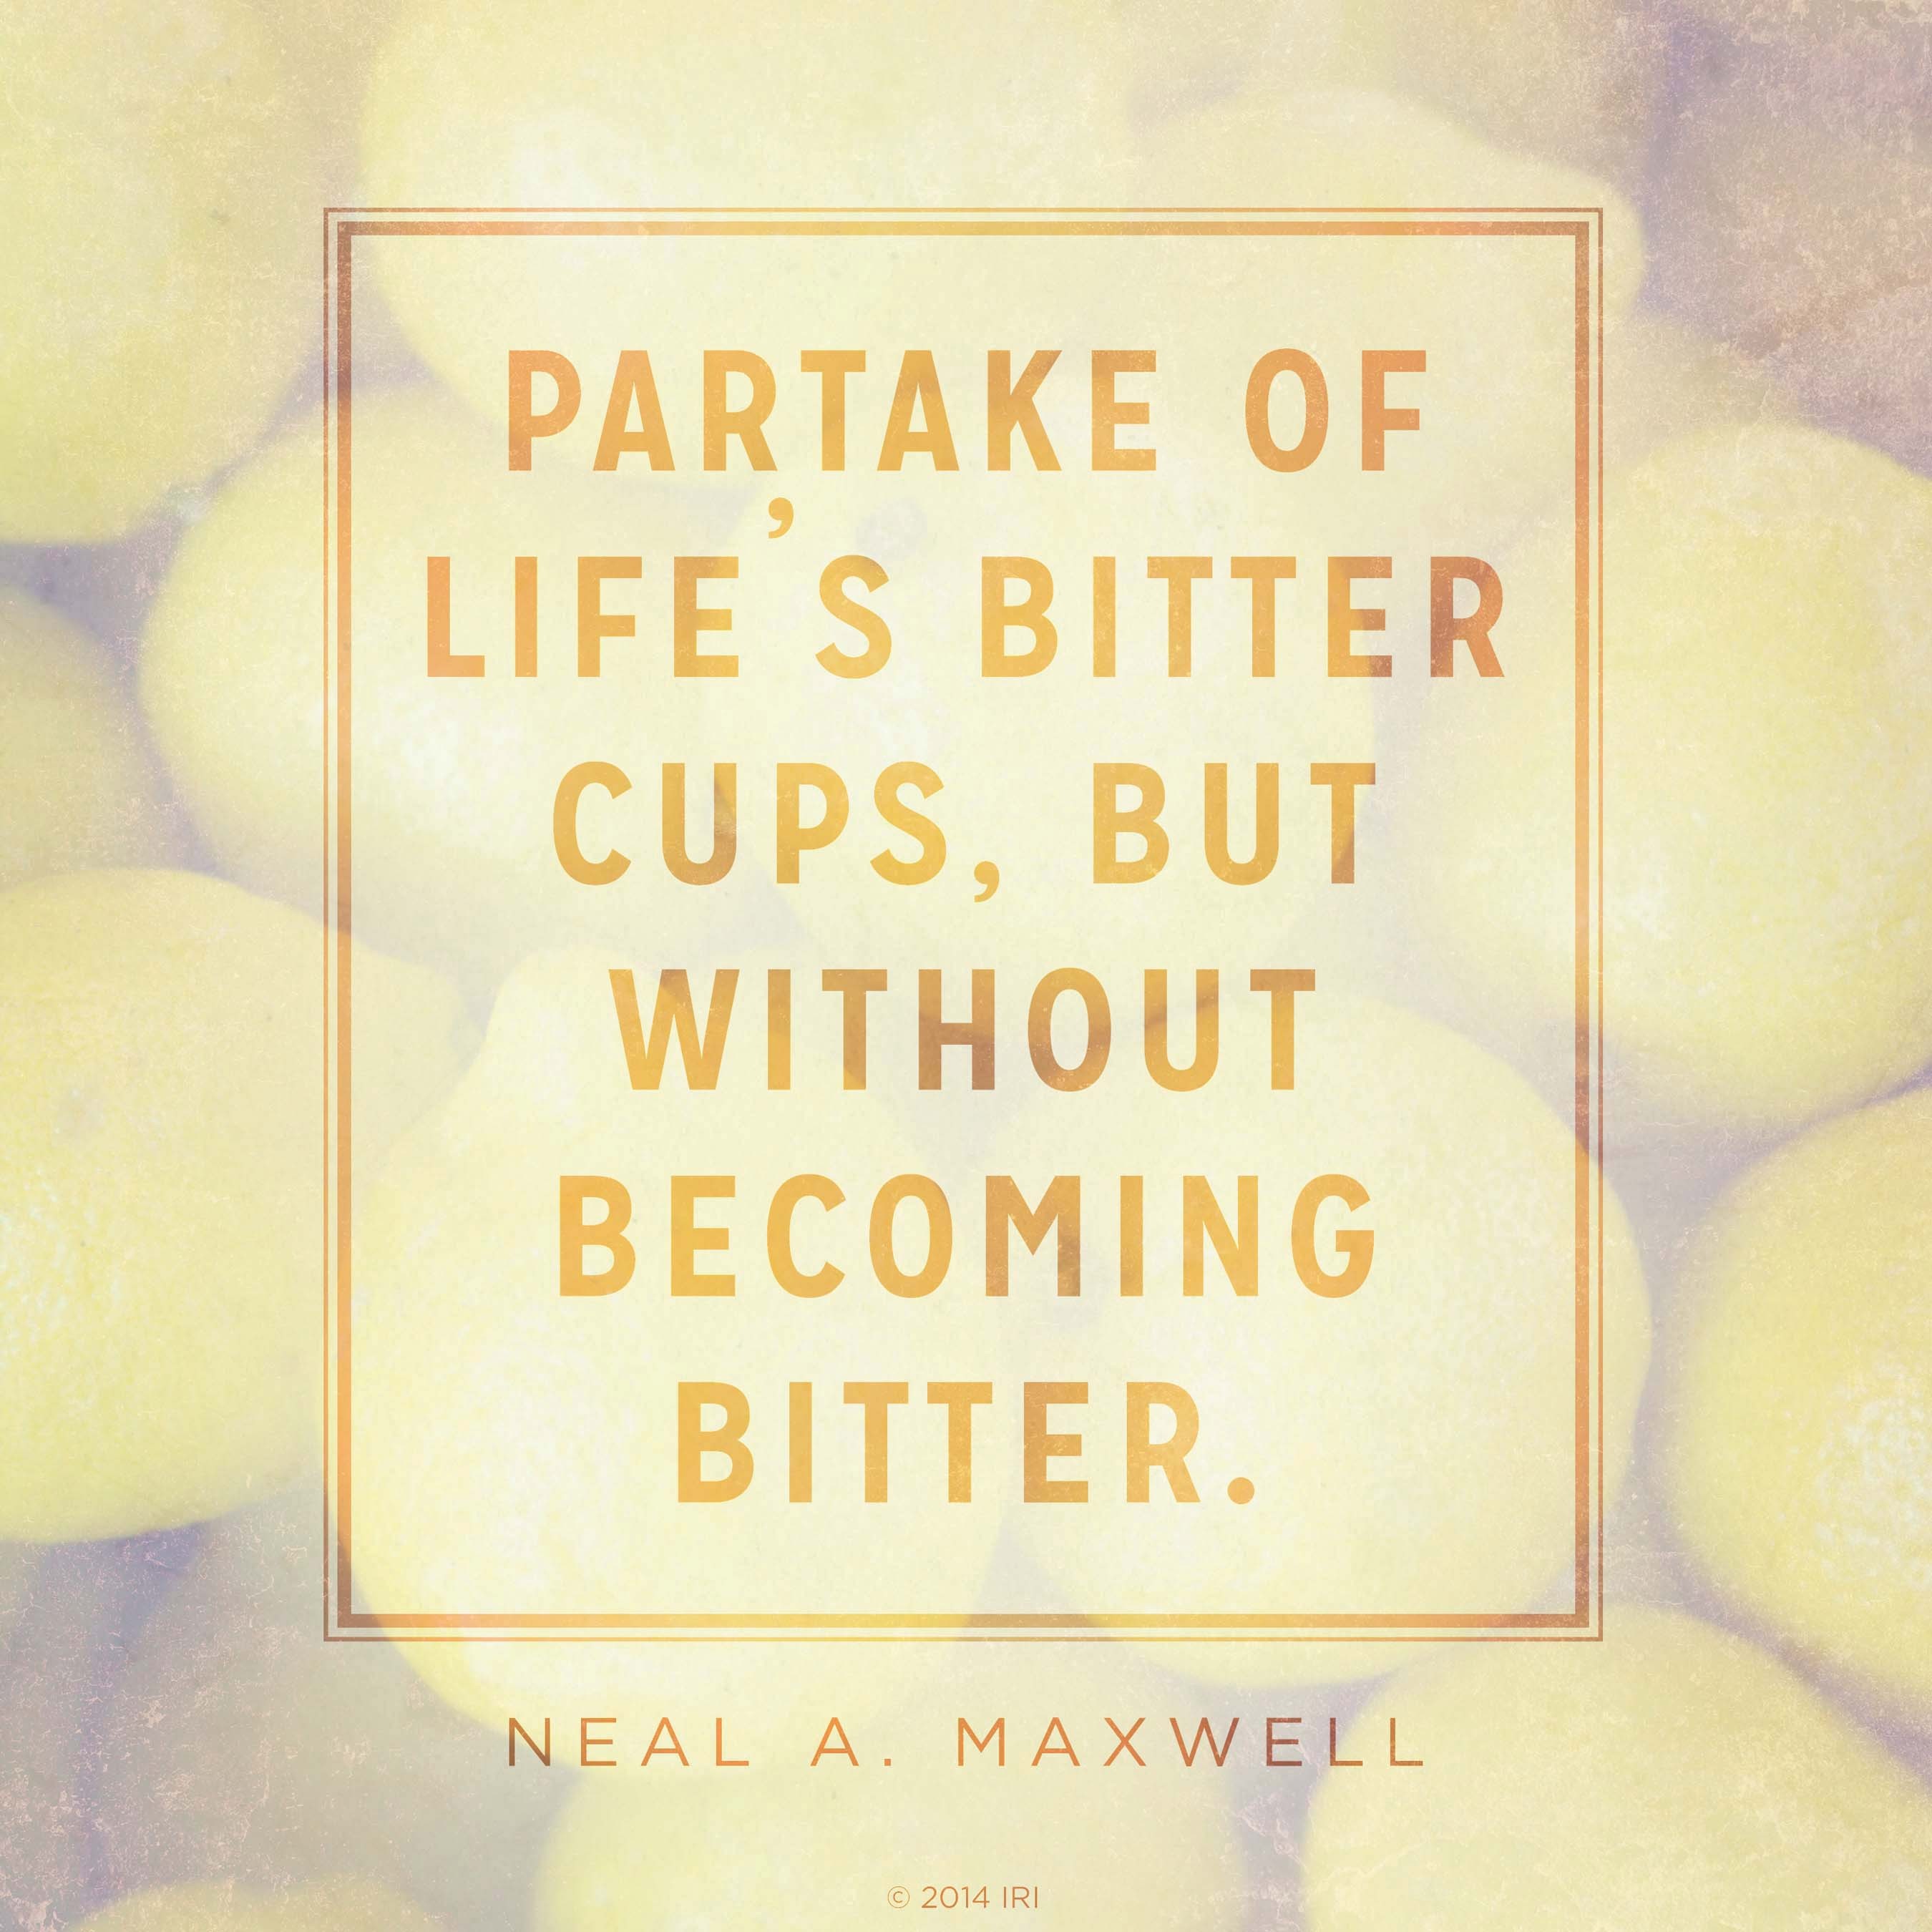 An image of lemons combined with a quote by Elder Neal A. Maxwell: “Partake of life’s bitter cups … without becoming bitter.”